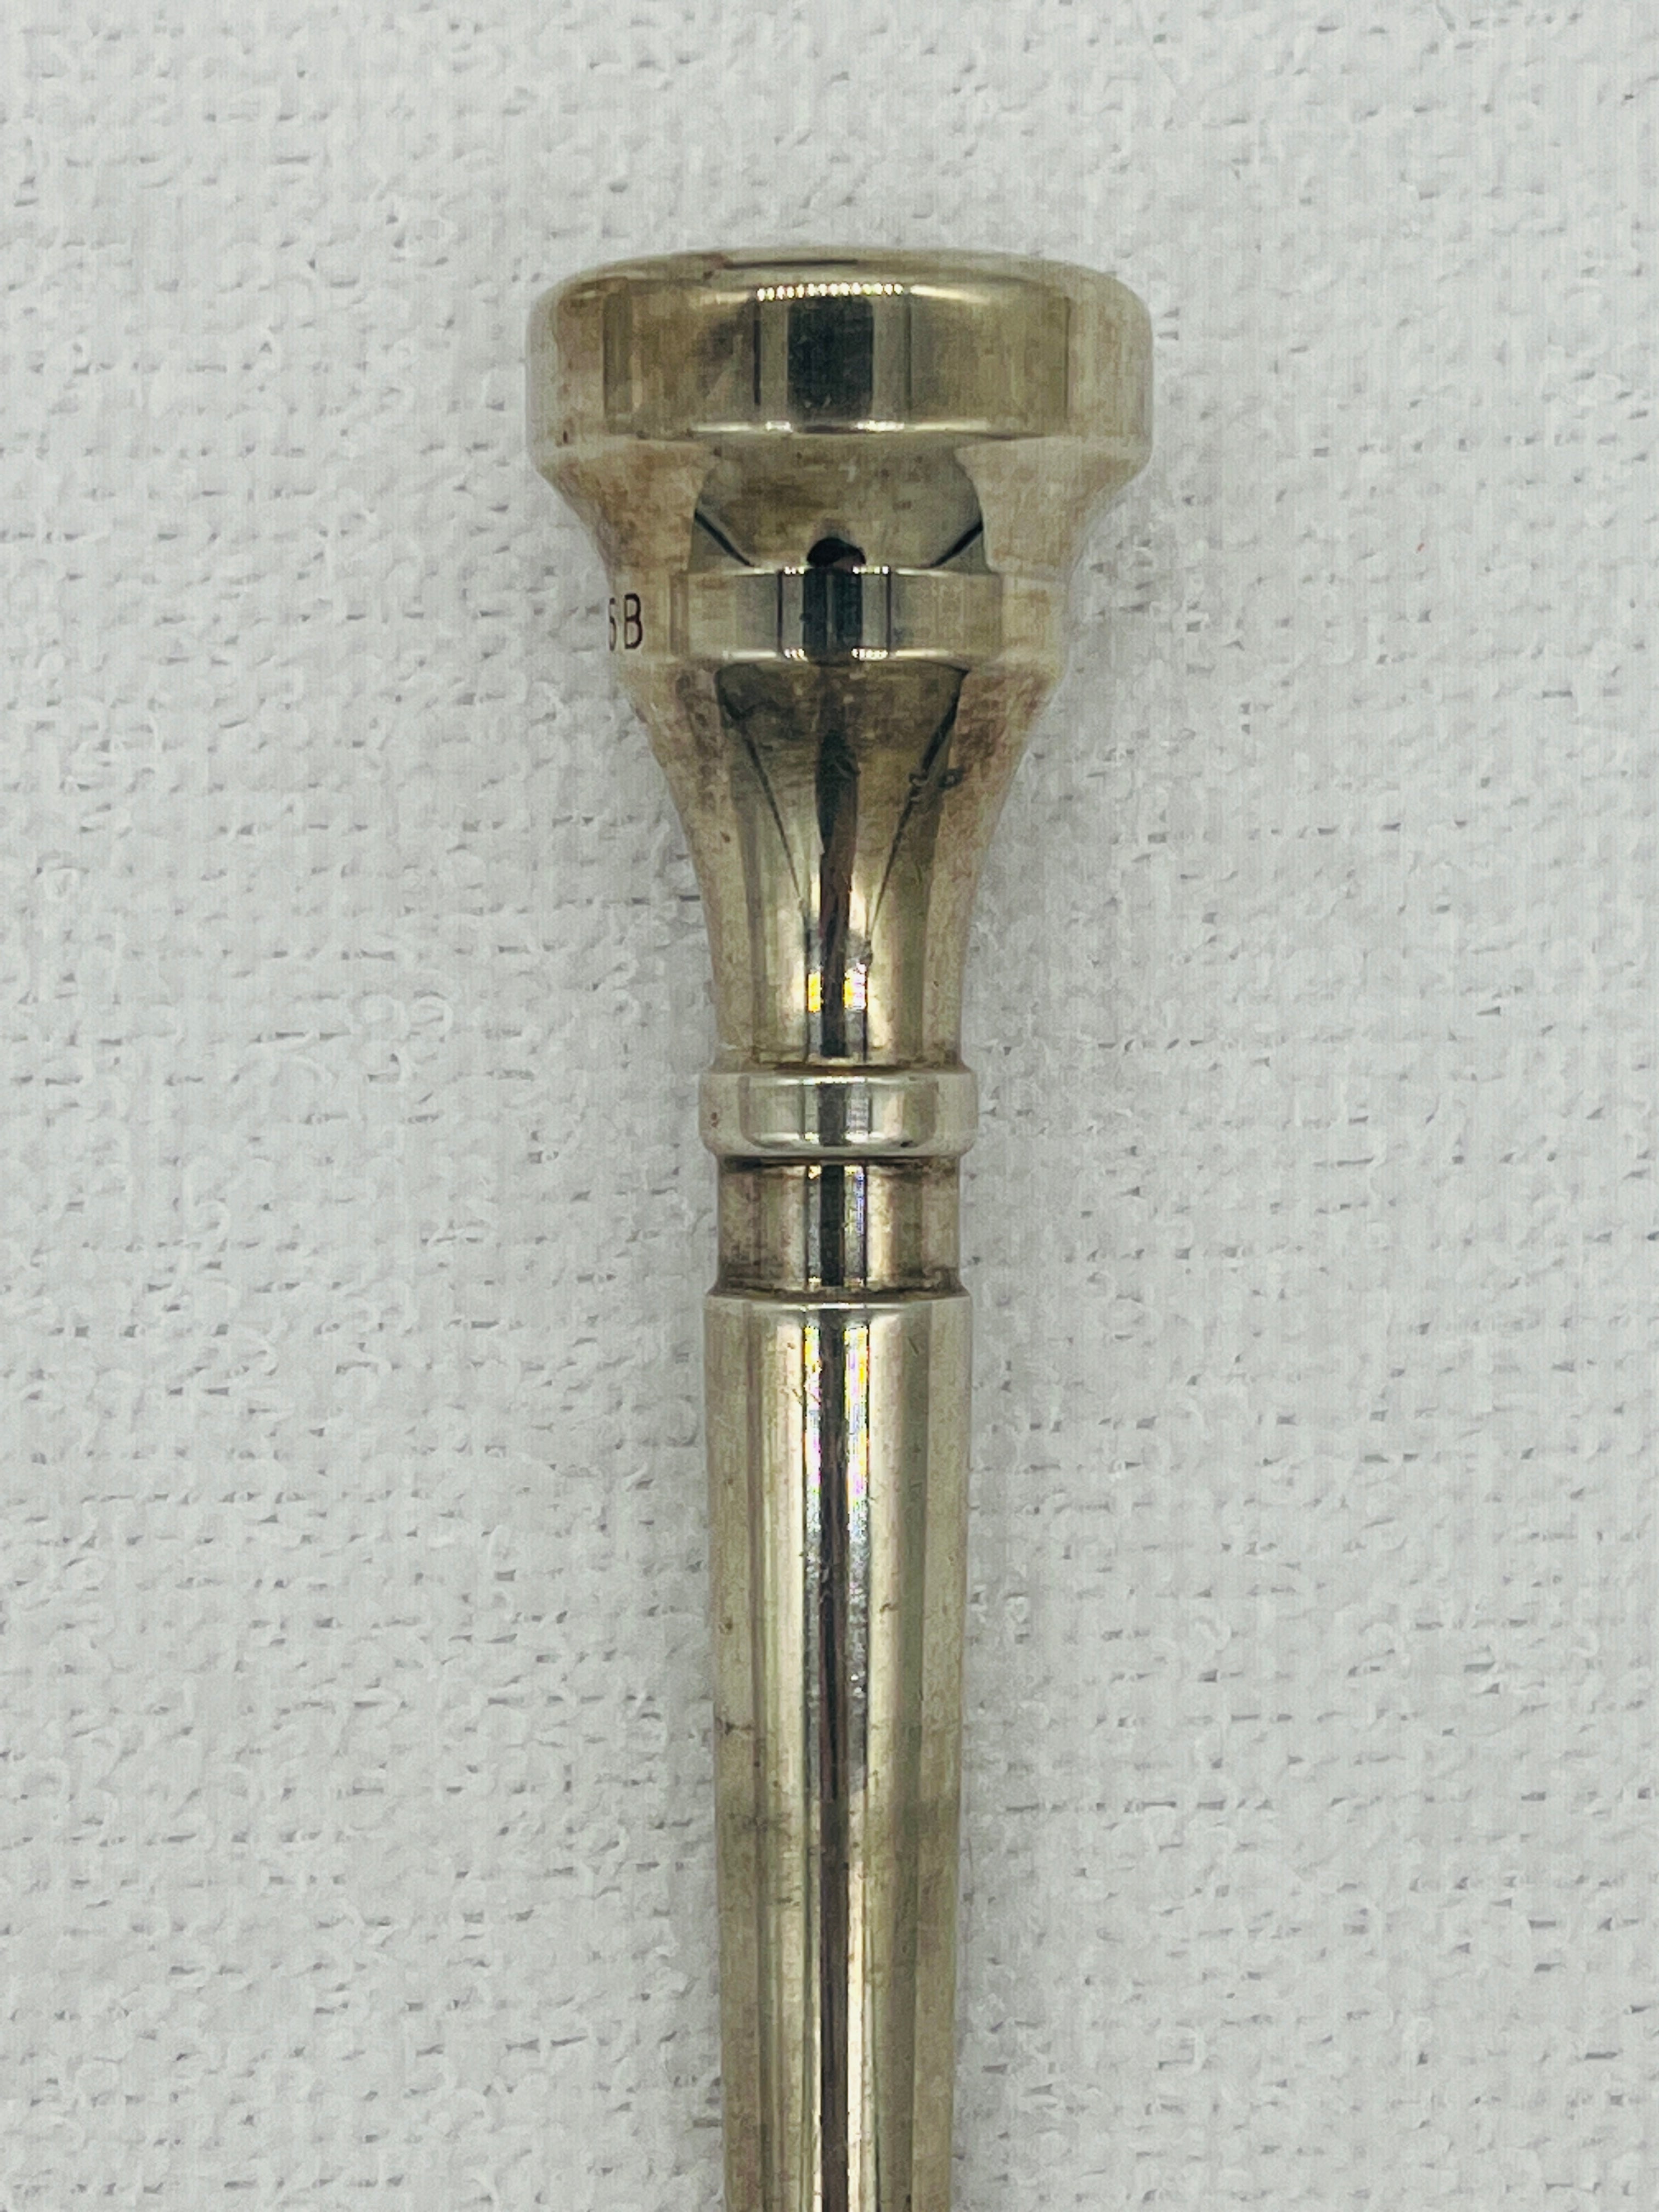 UMI  5B Trumpet Mouthpiece Silver Plated USED